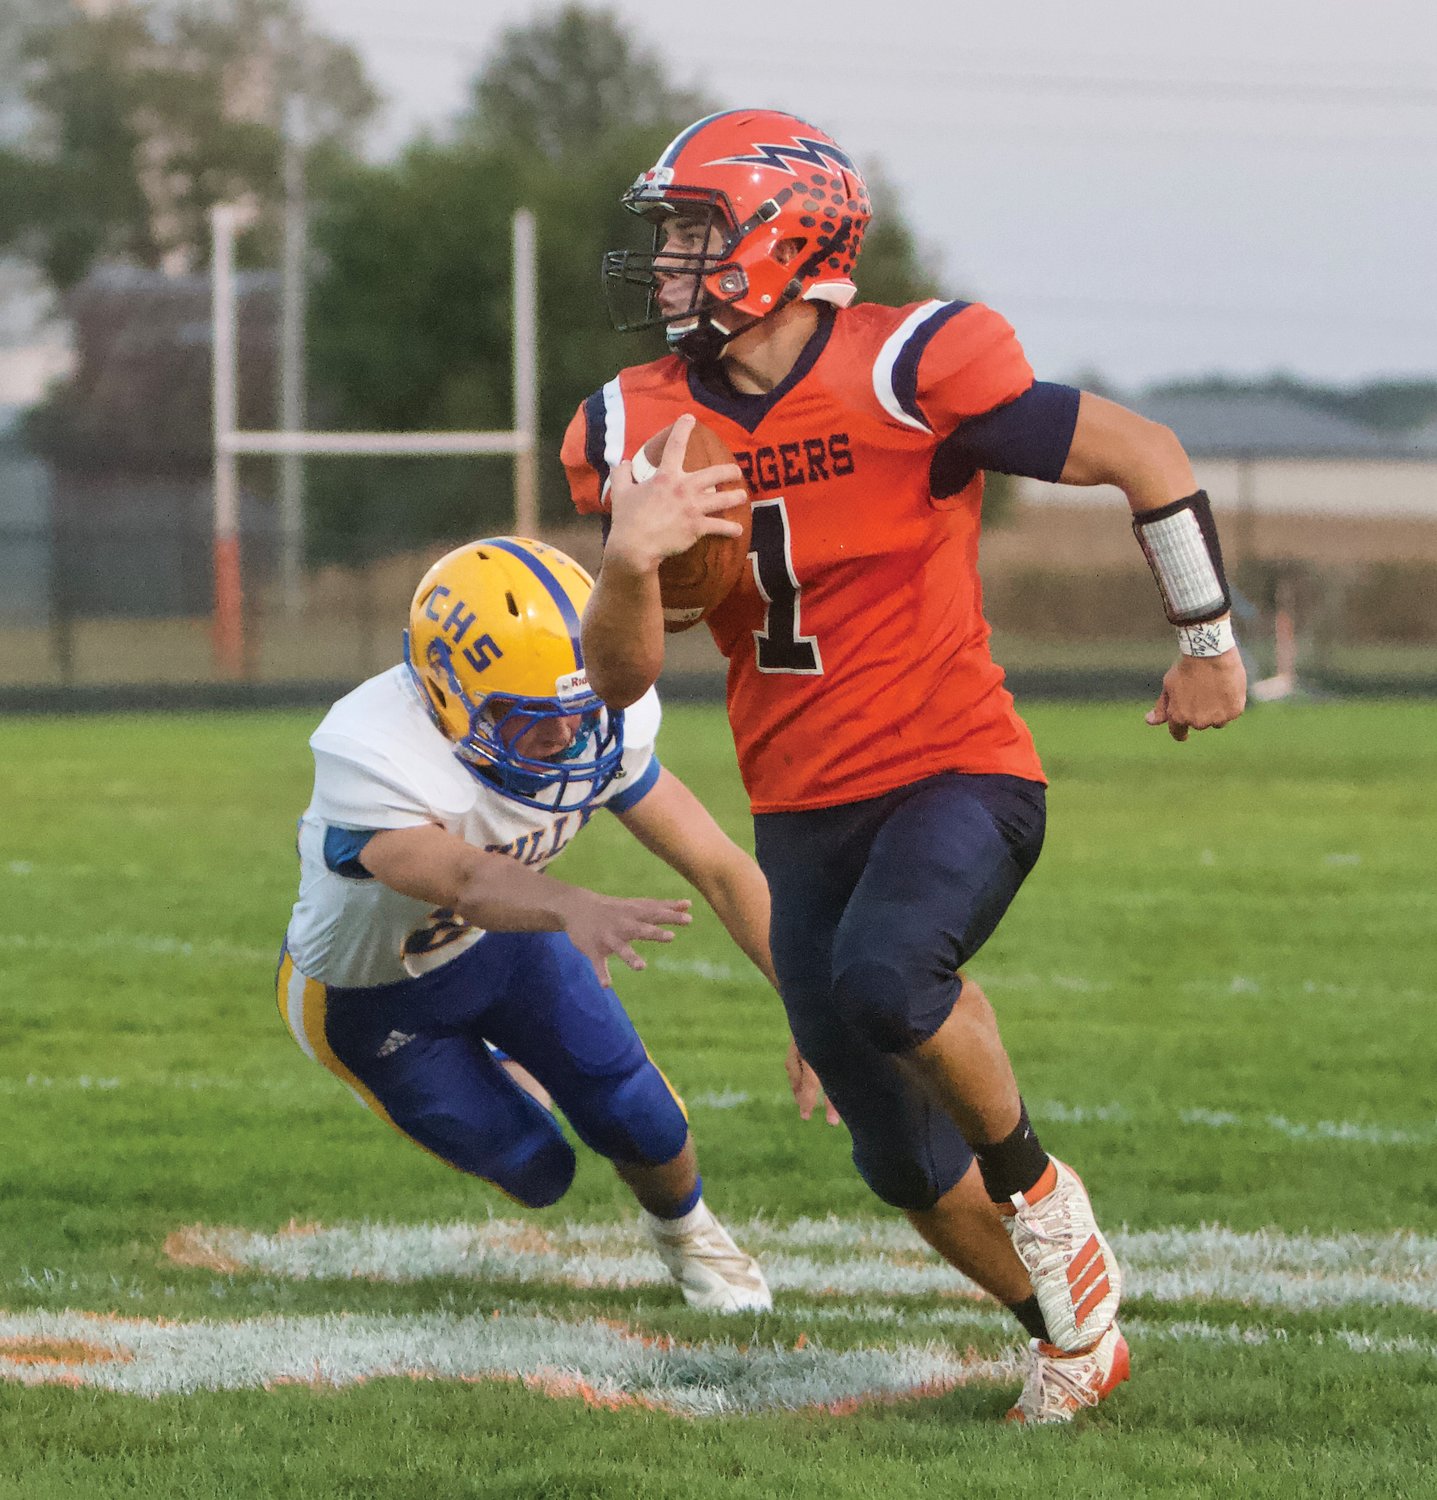 North Montgomery’s Logan Kelly broke free for a 49-yard touchdown catch and run on Friday.